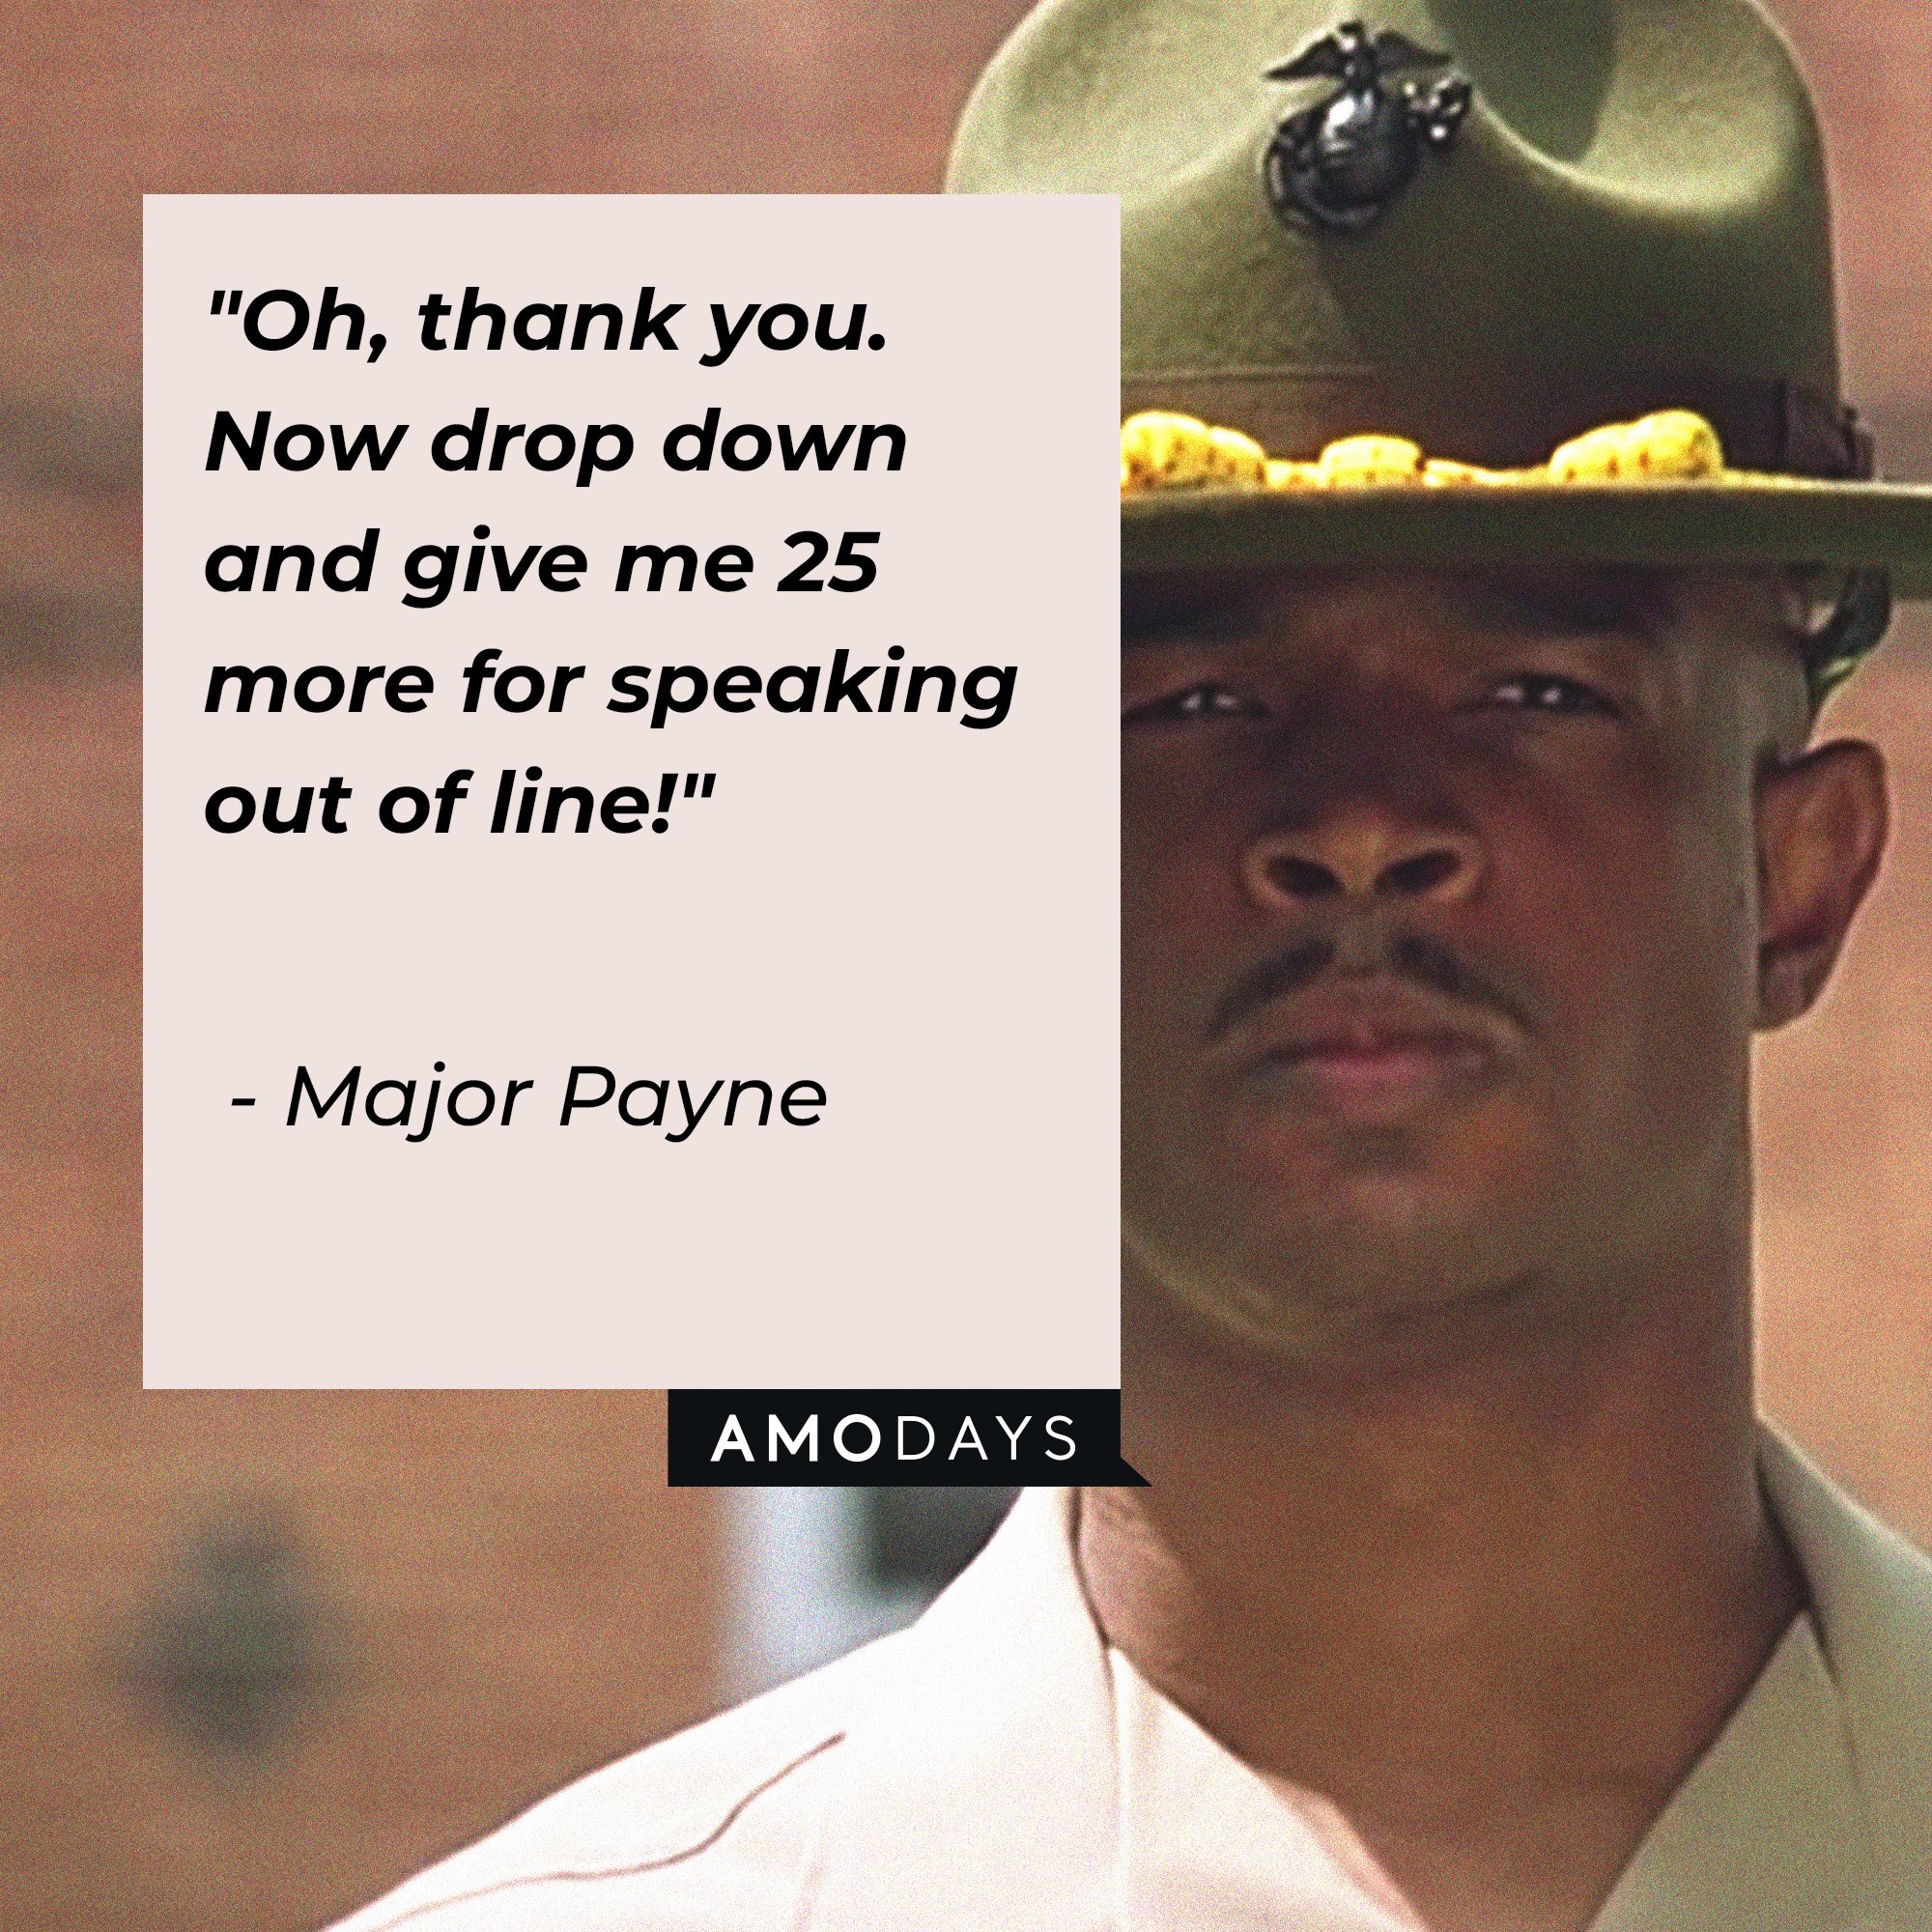 Major Payne's quote: "Oh, thank you. Now drop down and give me 25 more for speaking out of line!"  | Source: Amodays